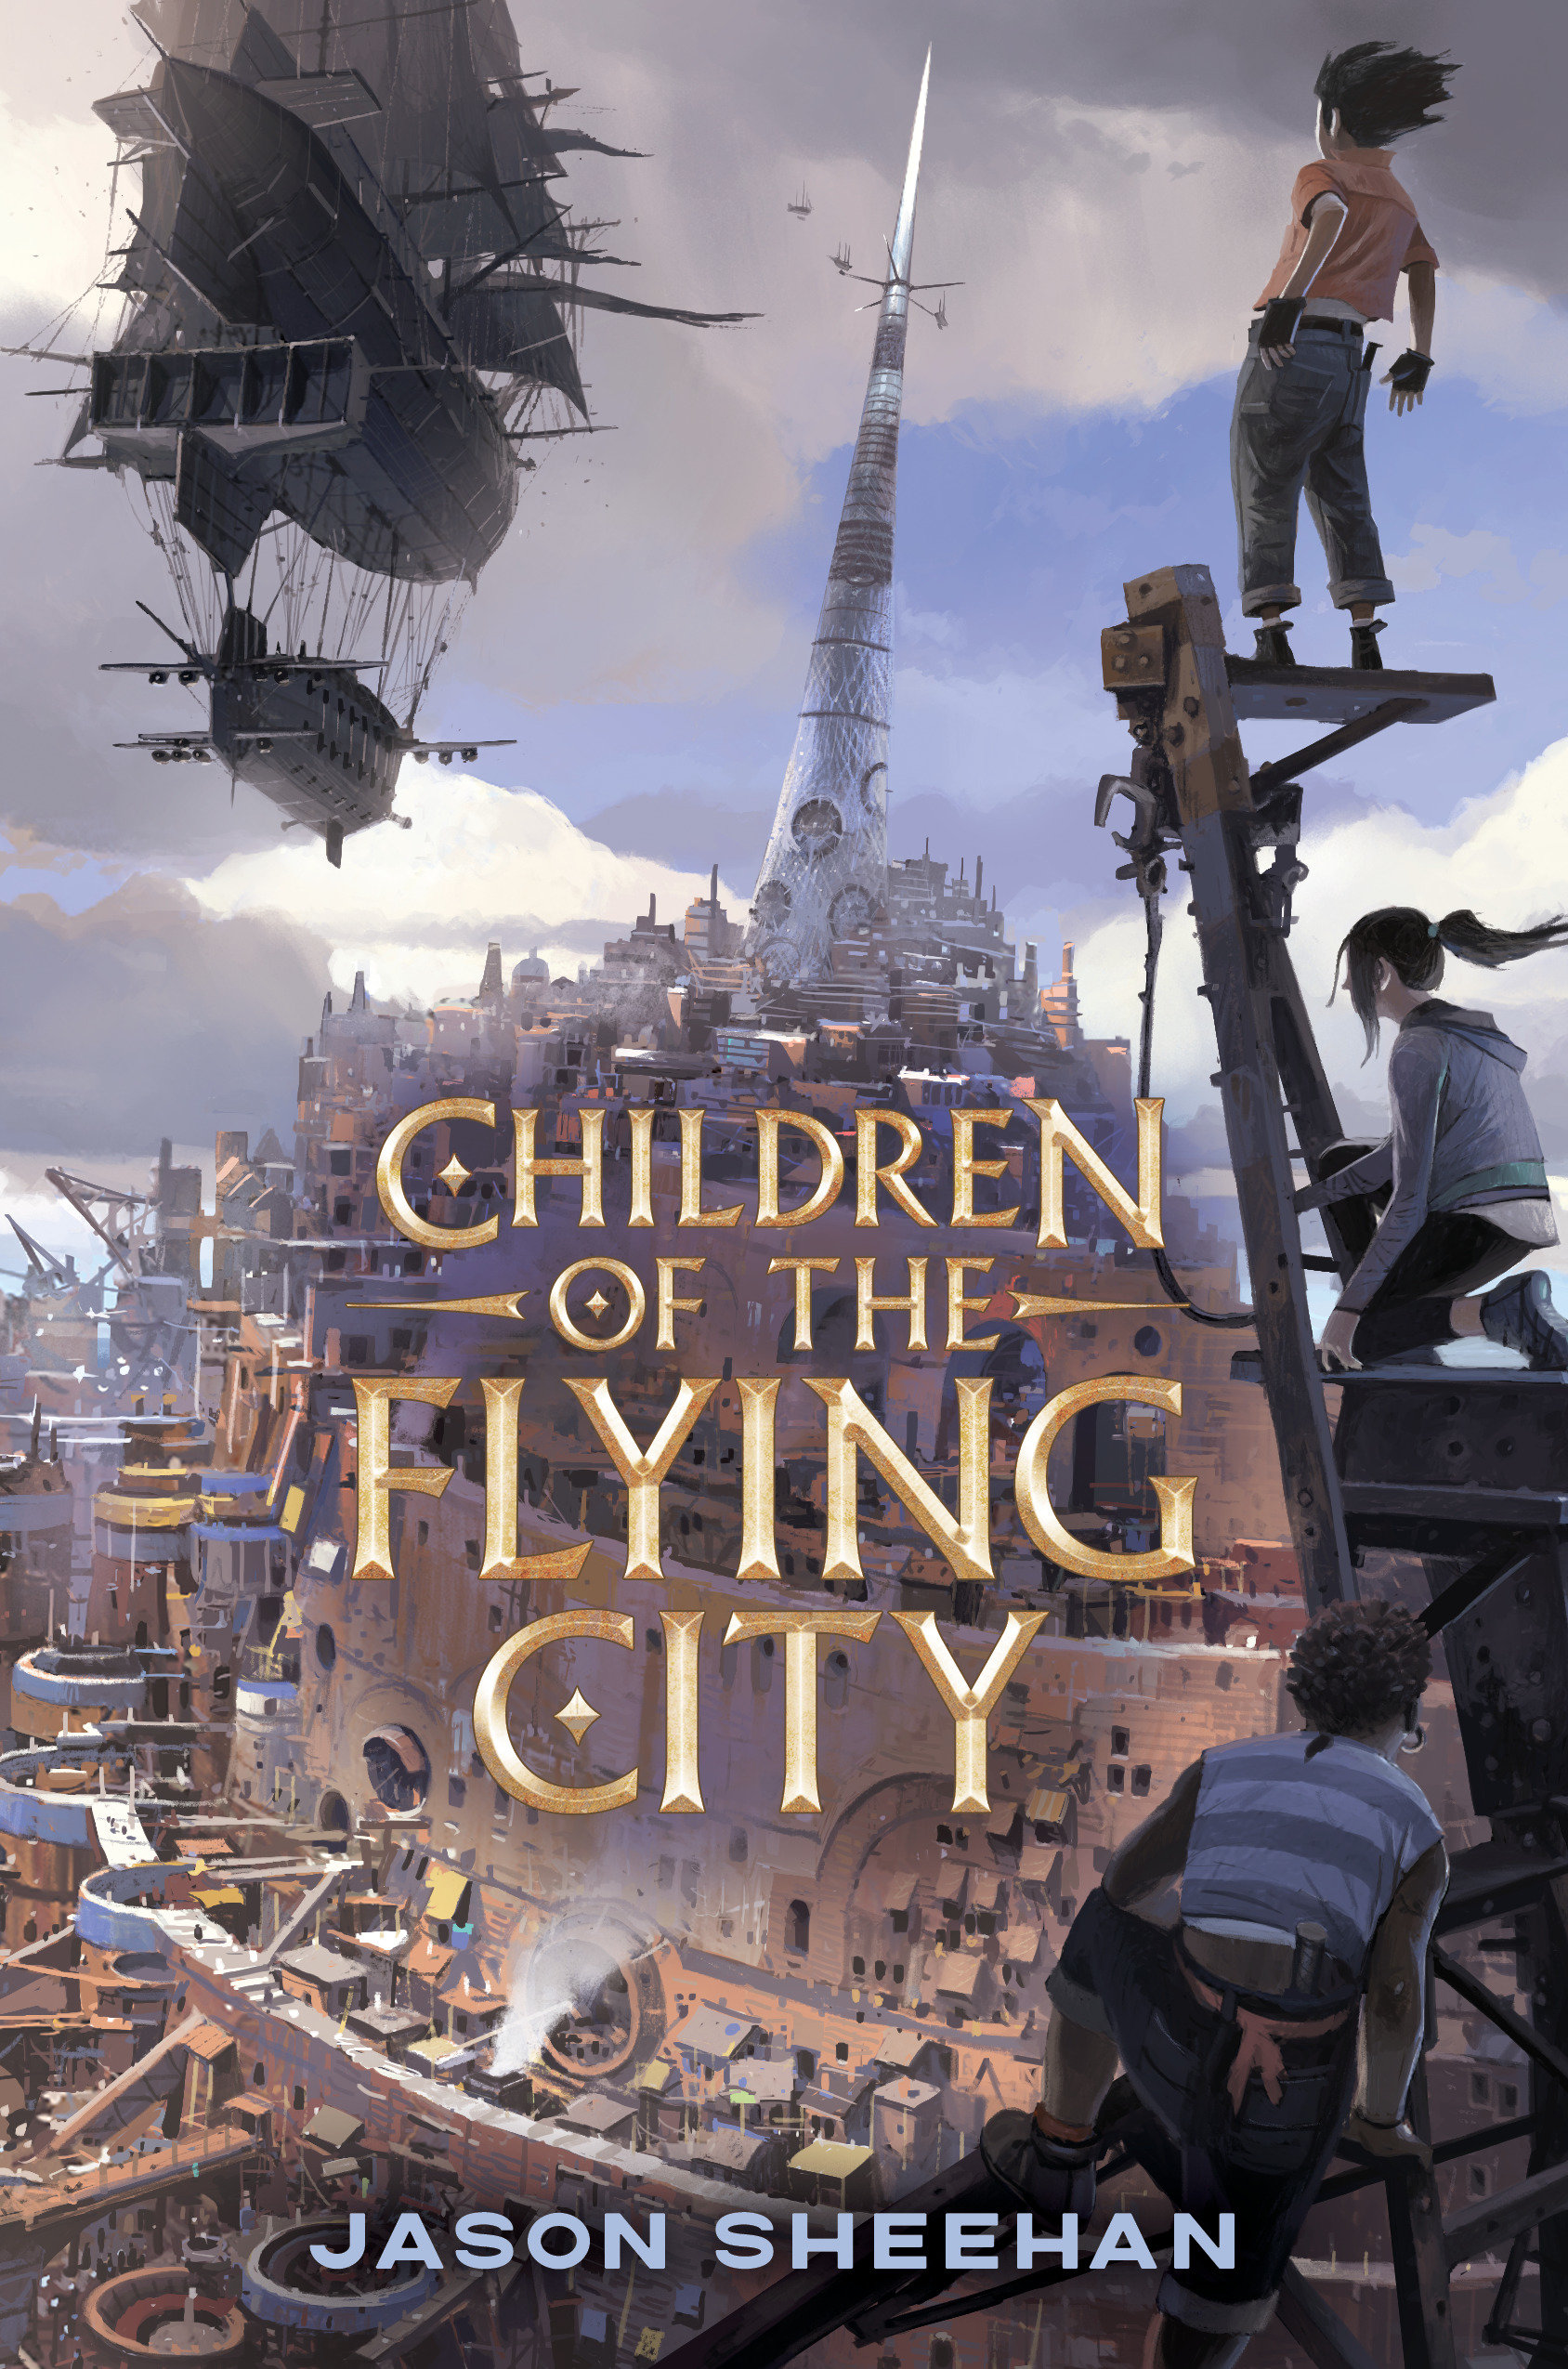 Children Of The Flying City (Hardcover Book)